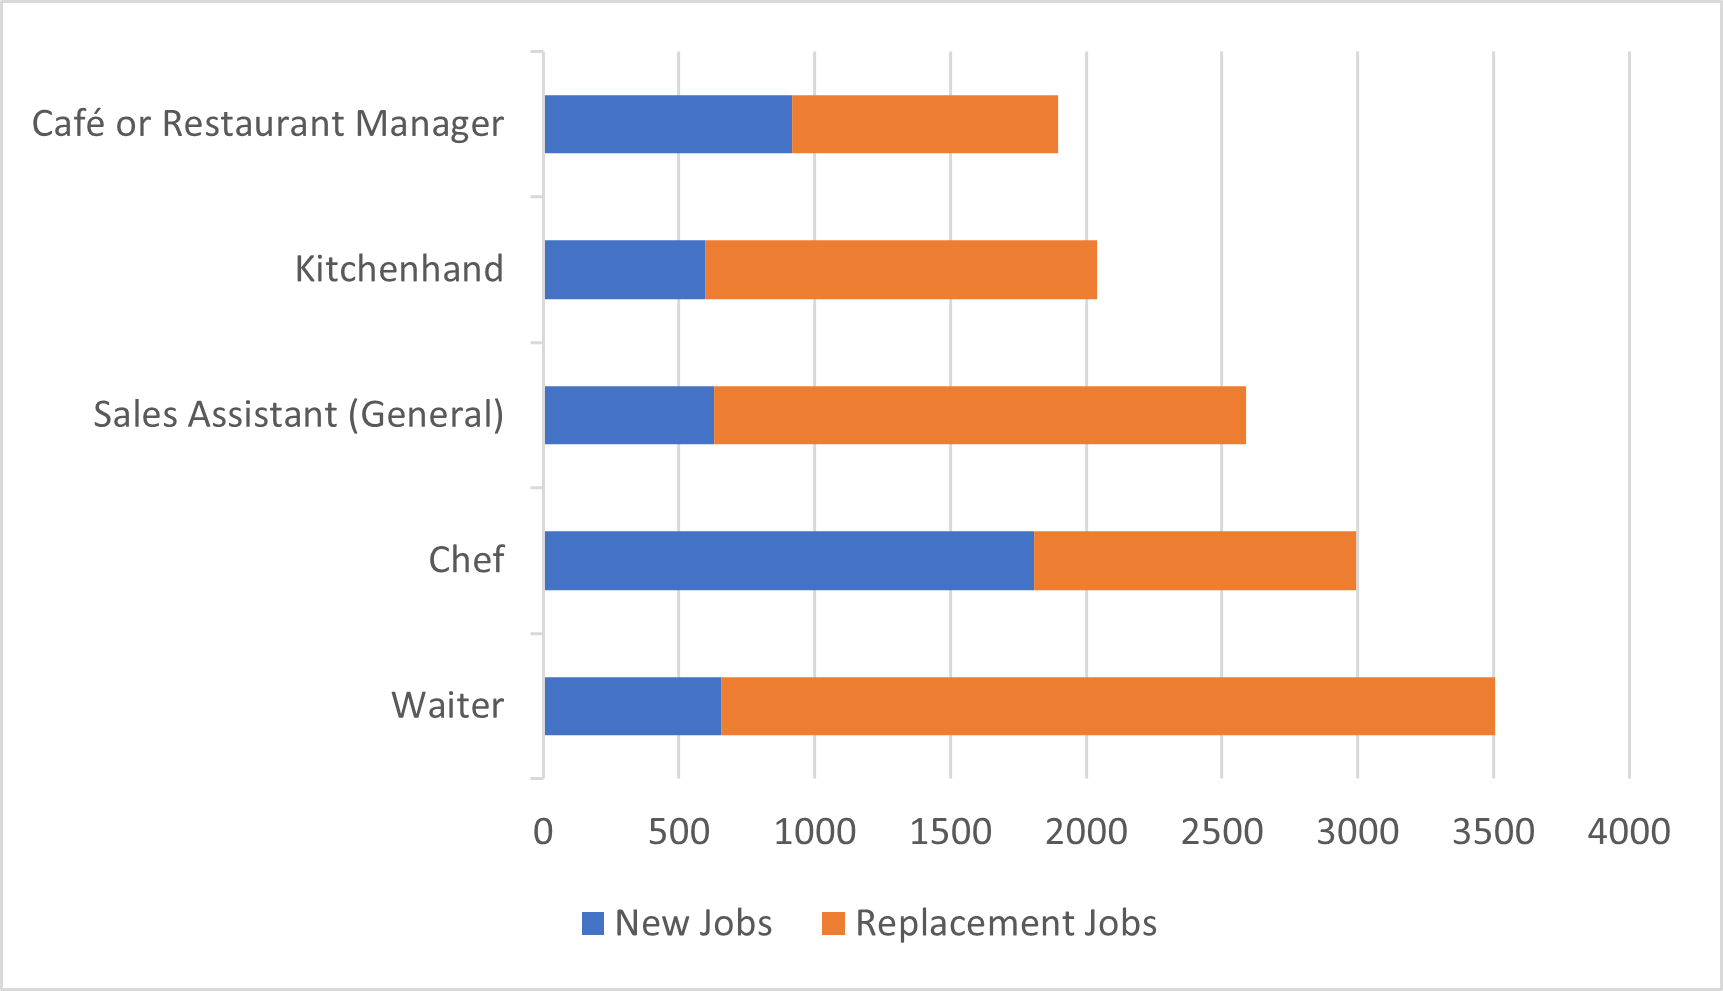 Bar graph of Forecast job opening and detailed occupations - Accommodation and Food Services sector in Auckland, 2023-2028